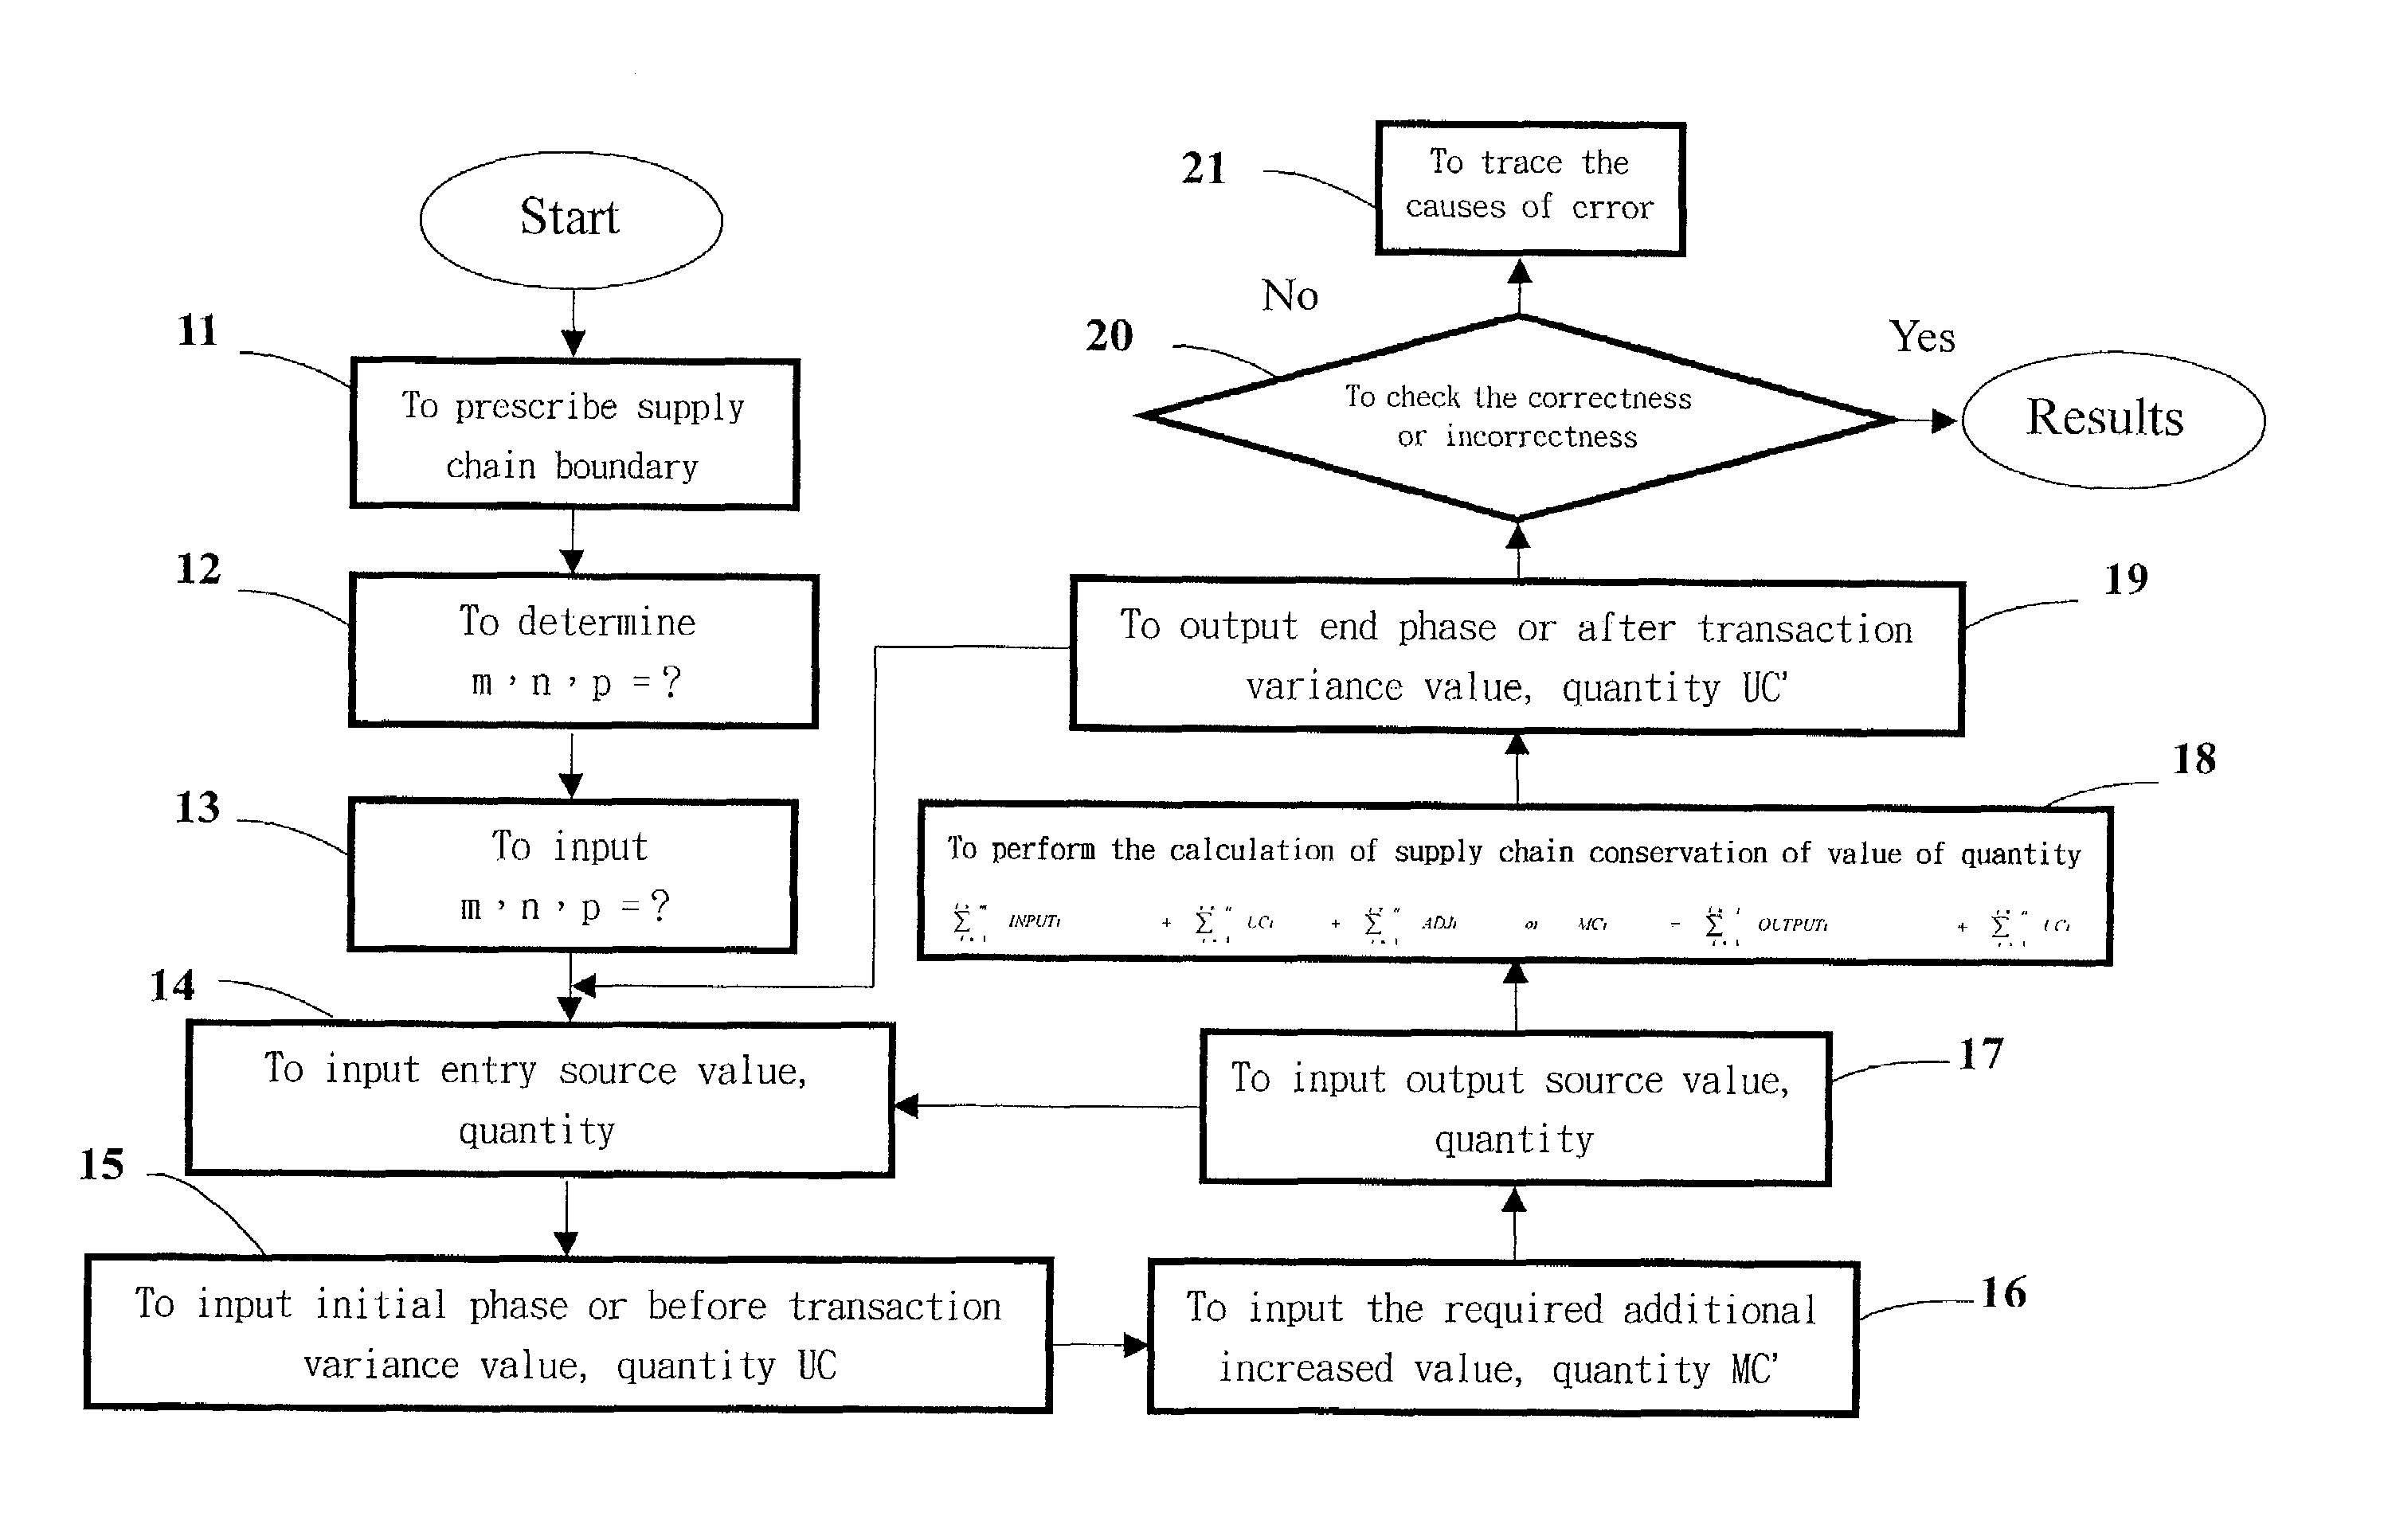 Application of supply chain unit cell or cell group or boundary conservation of value and quantity to computer management system